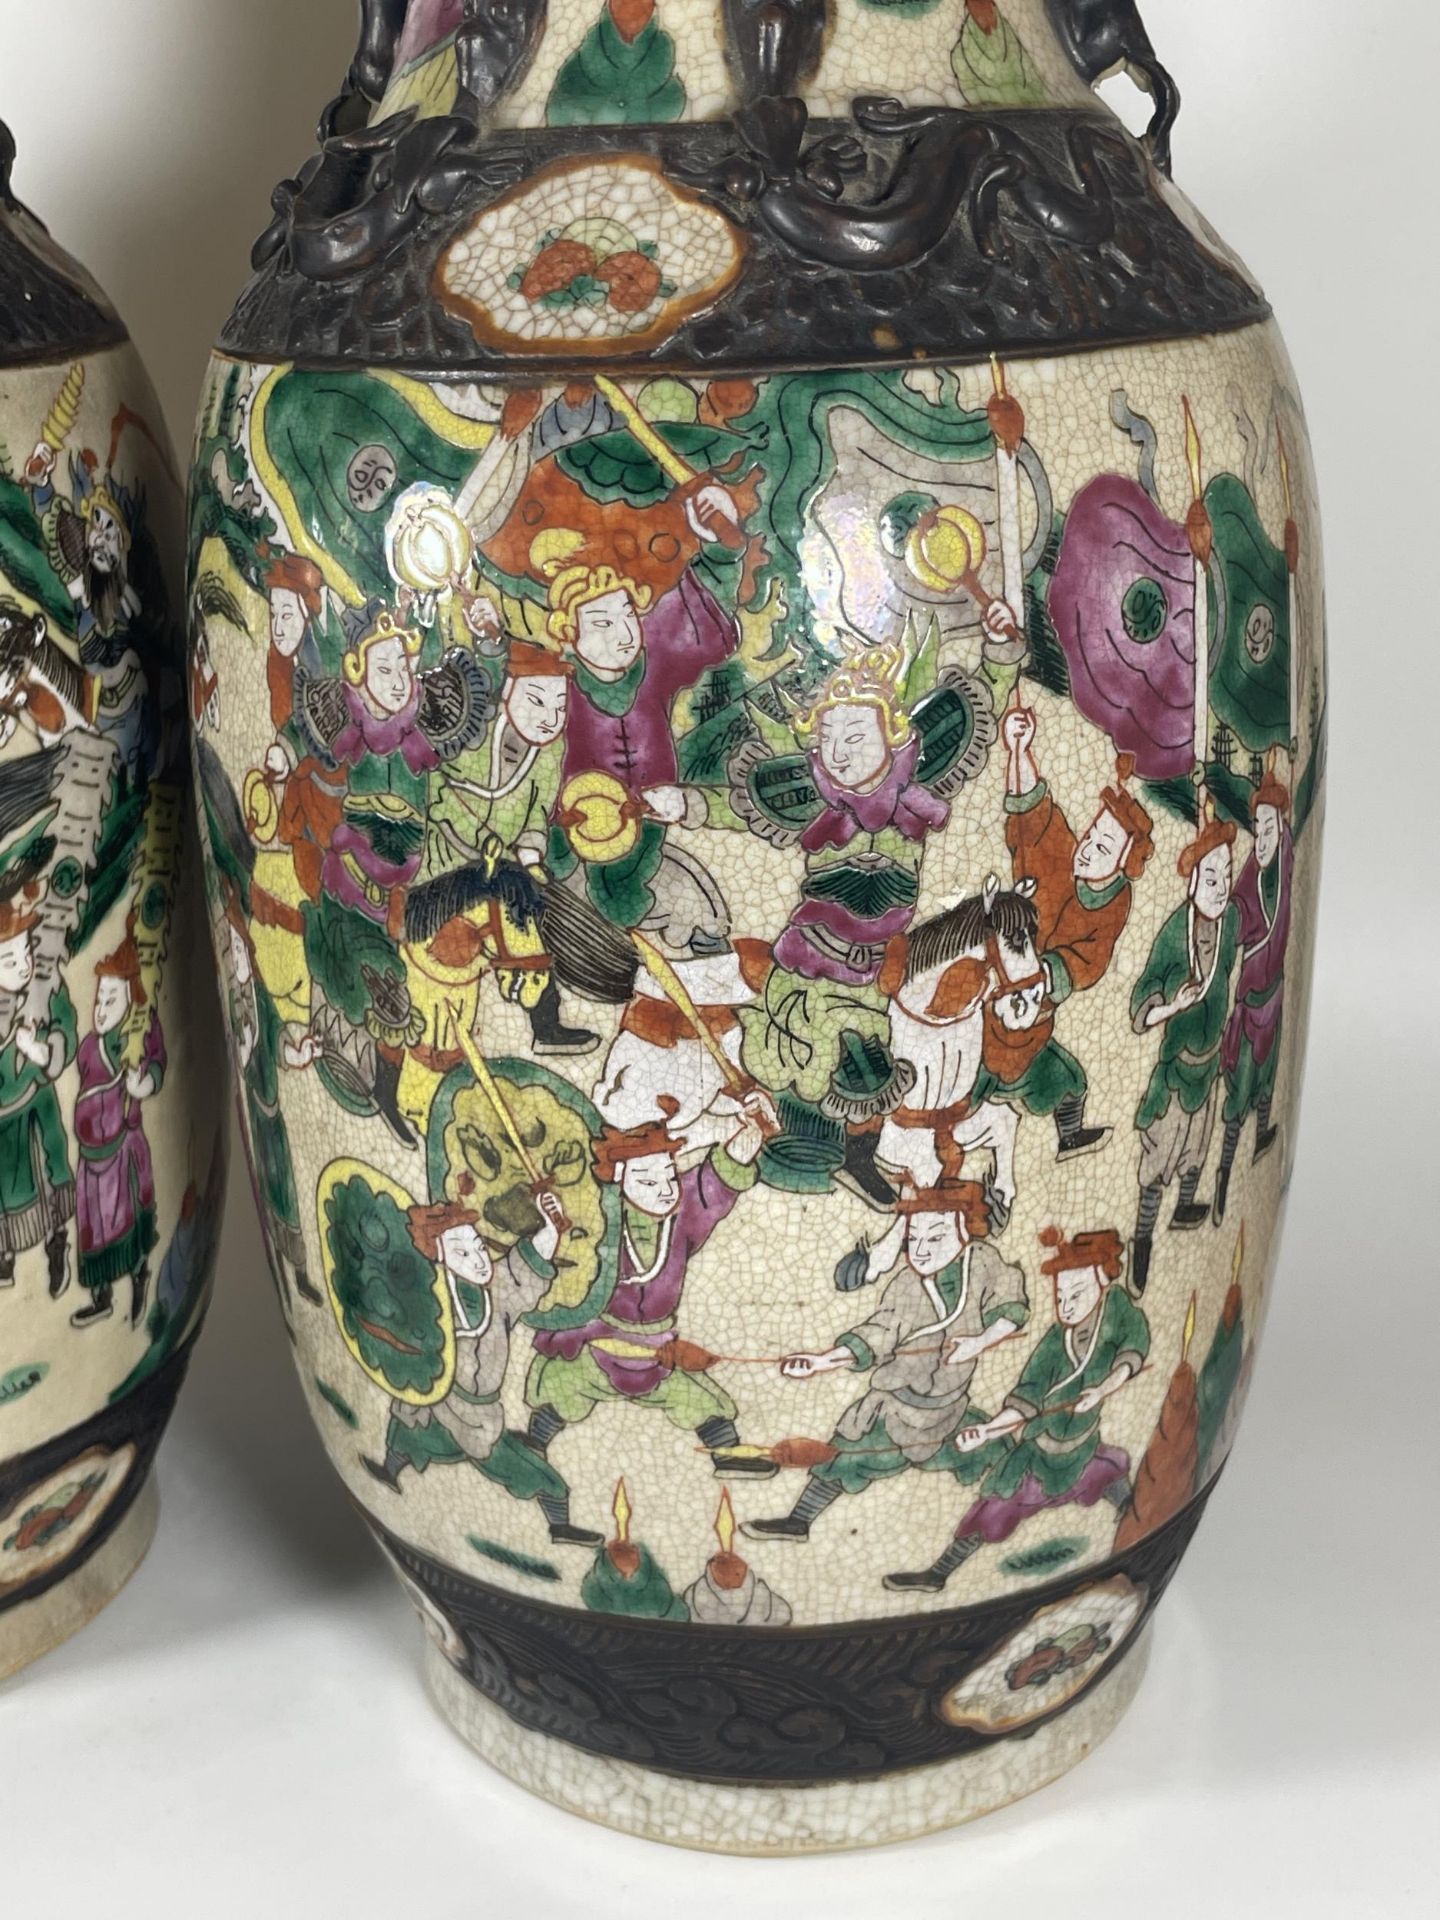 A HUGE PAIR OF CHINESE LATE 19TH / EARLY 20TH CENTURY CRACKLE GLAZE PORCELAIN VASES DEPICTING - Image 3 of 8